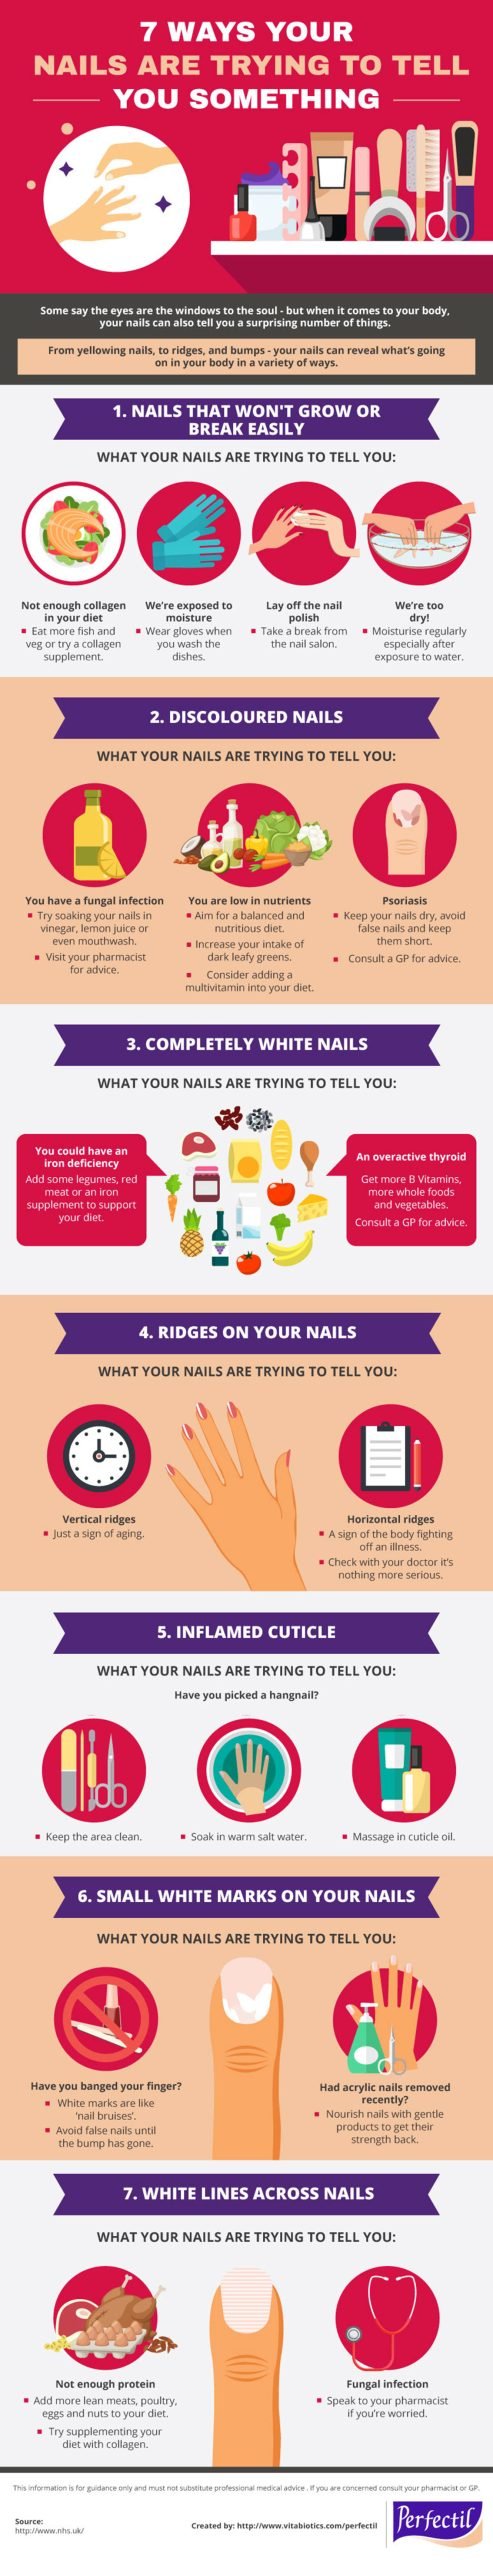 Common Nail Problems and Solutions